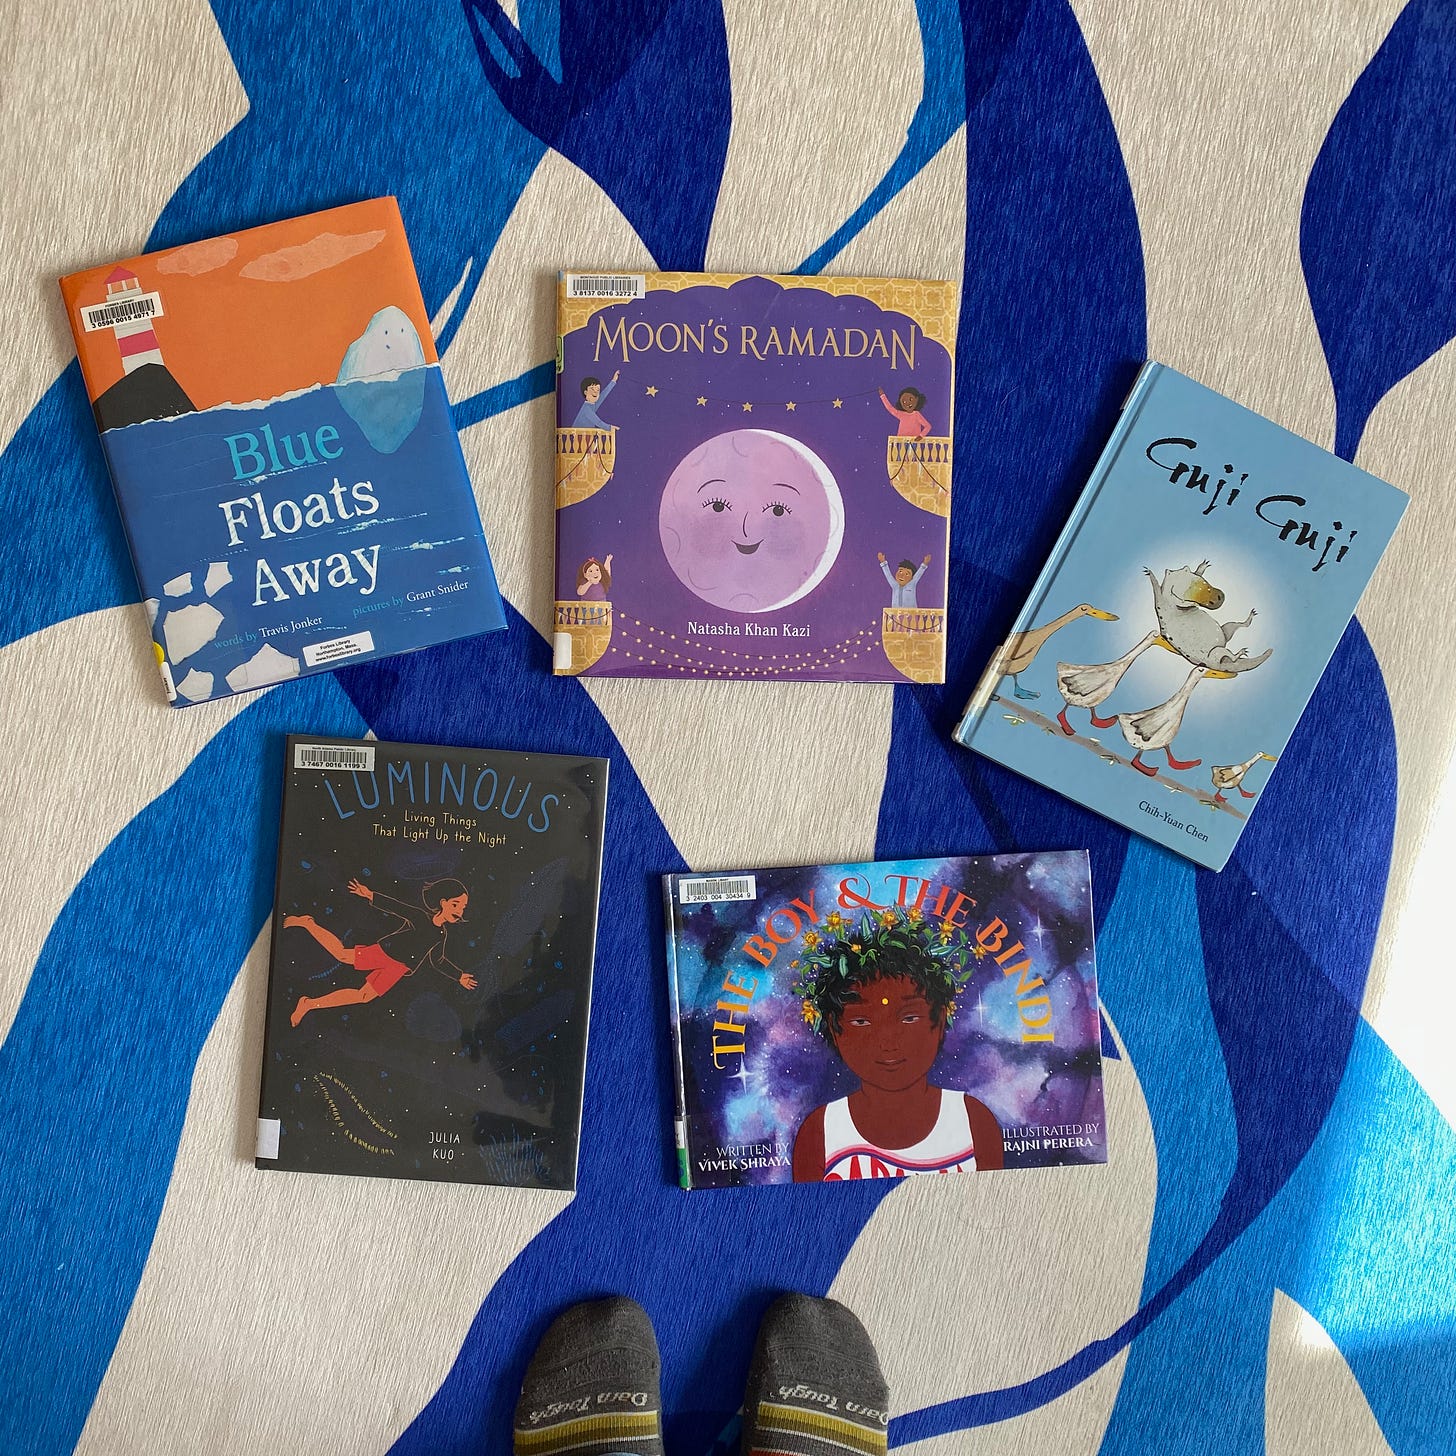 Five picture books arranged in a semi-circle on a blue and white rug: Blue Floats Away, Moon’s Ramadan, Guji Guji, Luminous, and The Boy and the Bindi.